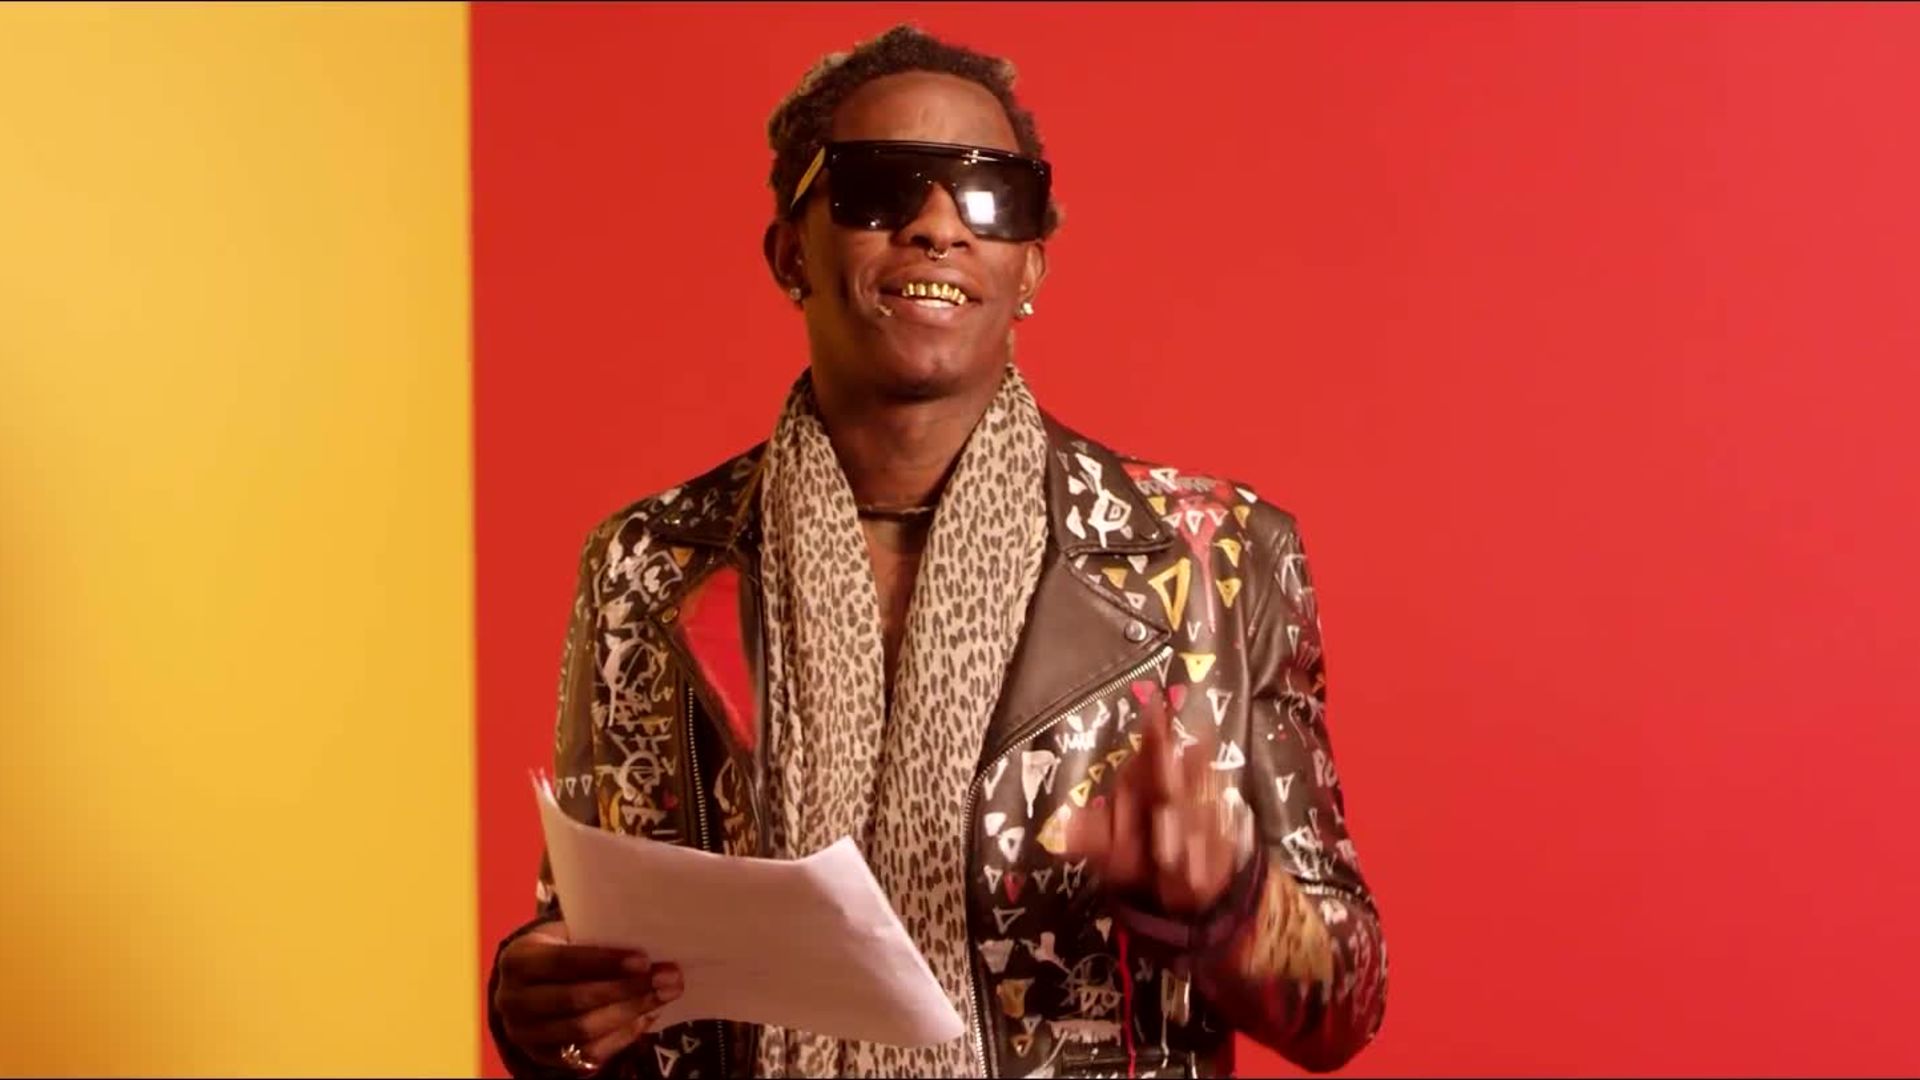 FACTS ABOUT YOUNG THUG